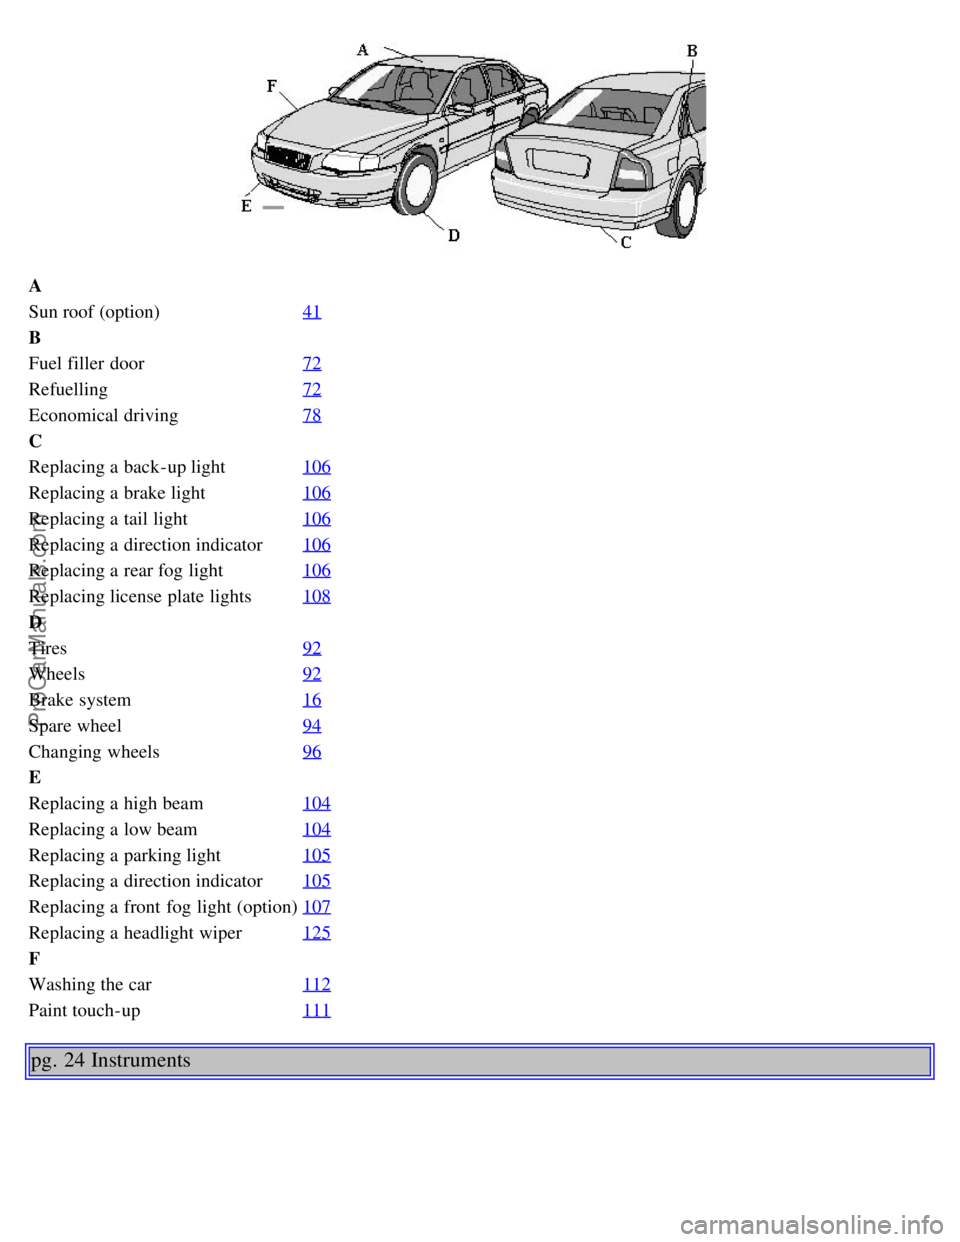 VOLVO S80 2003  Owners Manual A
Sun roof (option)41
B
Fuel filler  door72
Refuelling72
Economical driving78
C
Replacing a  back-up light106
Replacing a  brake light106
Replacing a  tail light106
Replacing a  direction indicator106